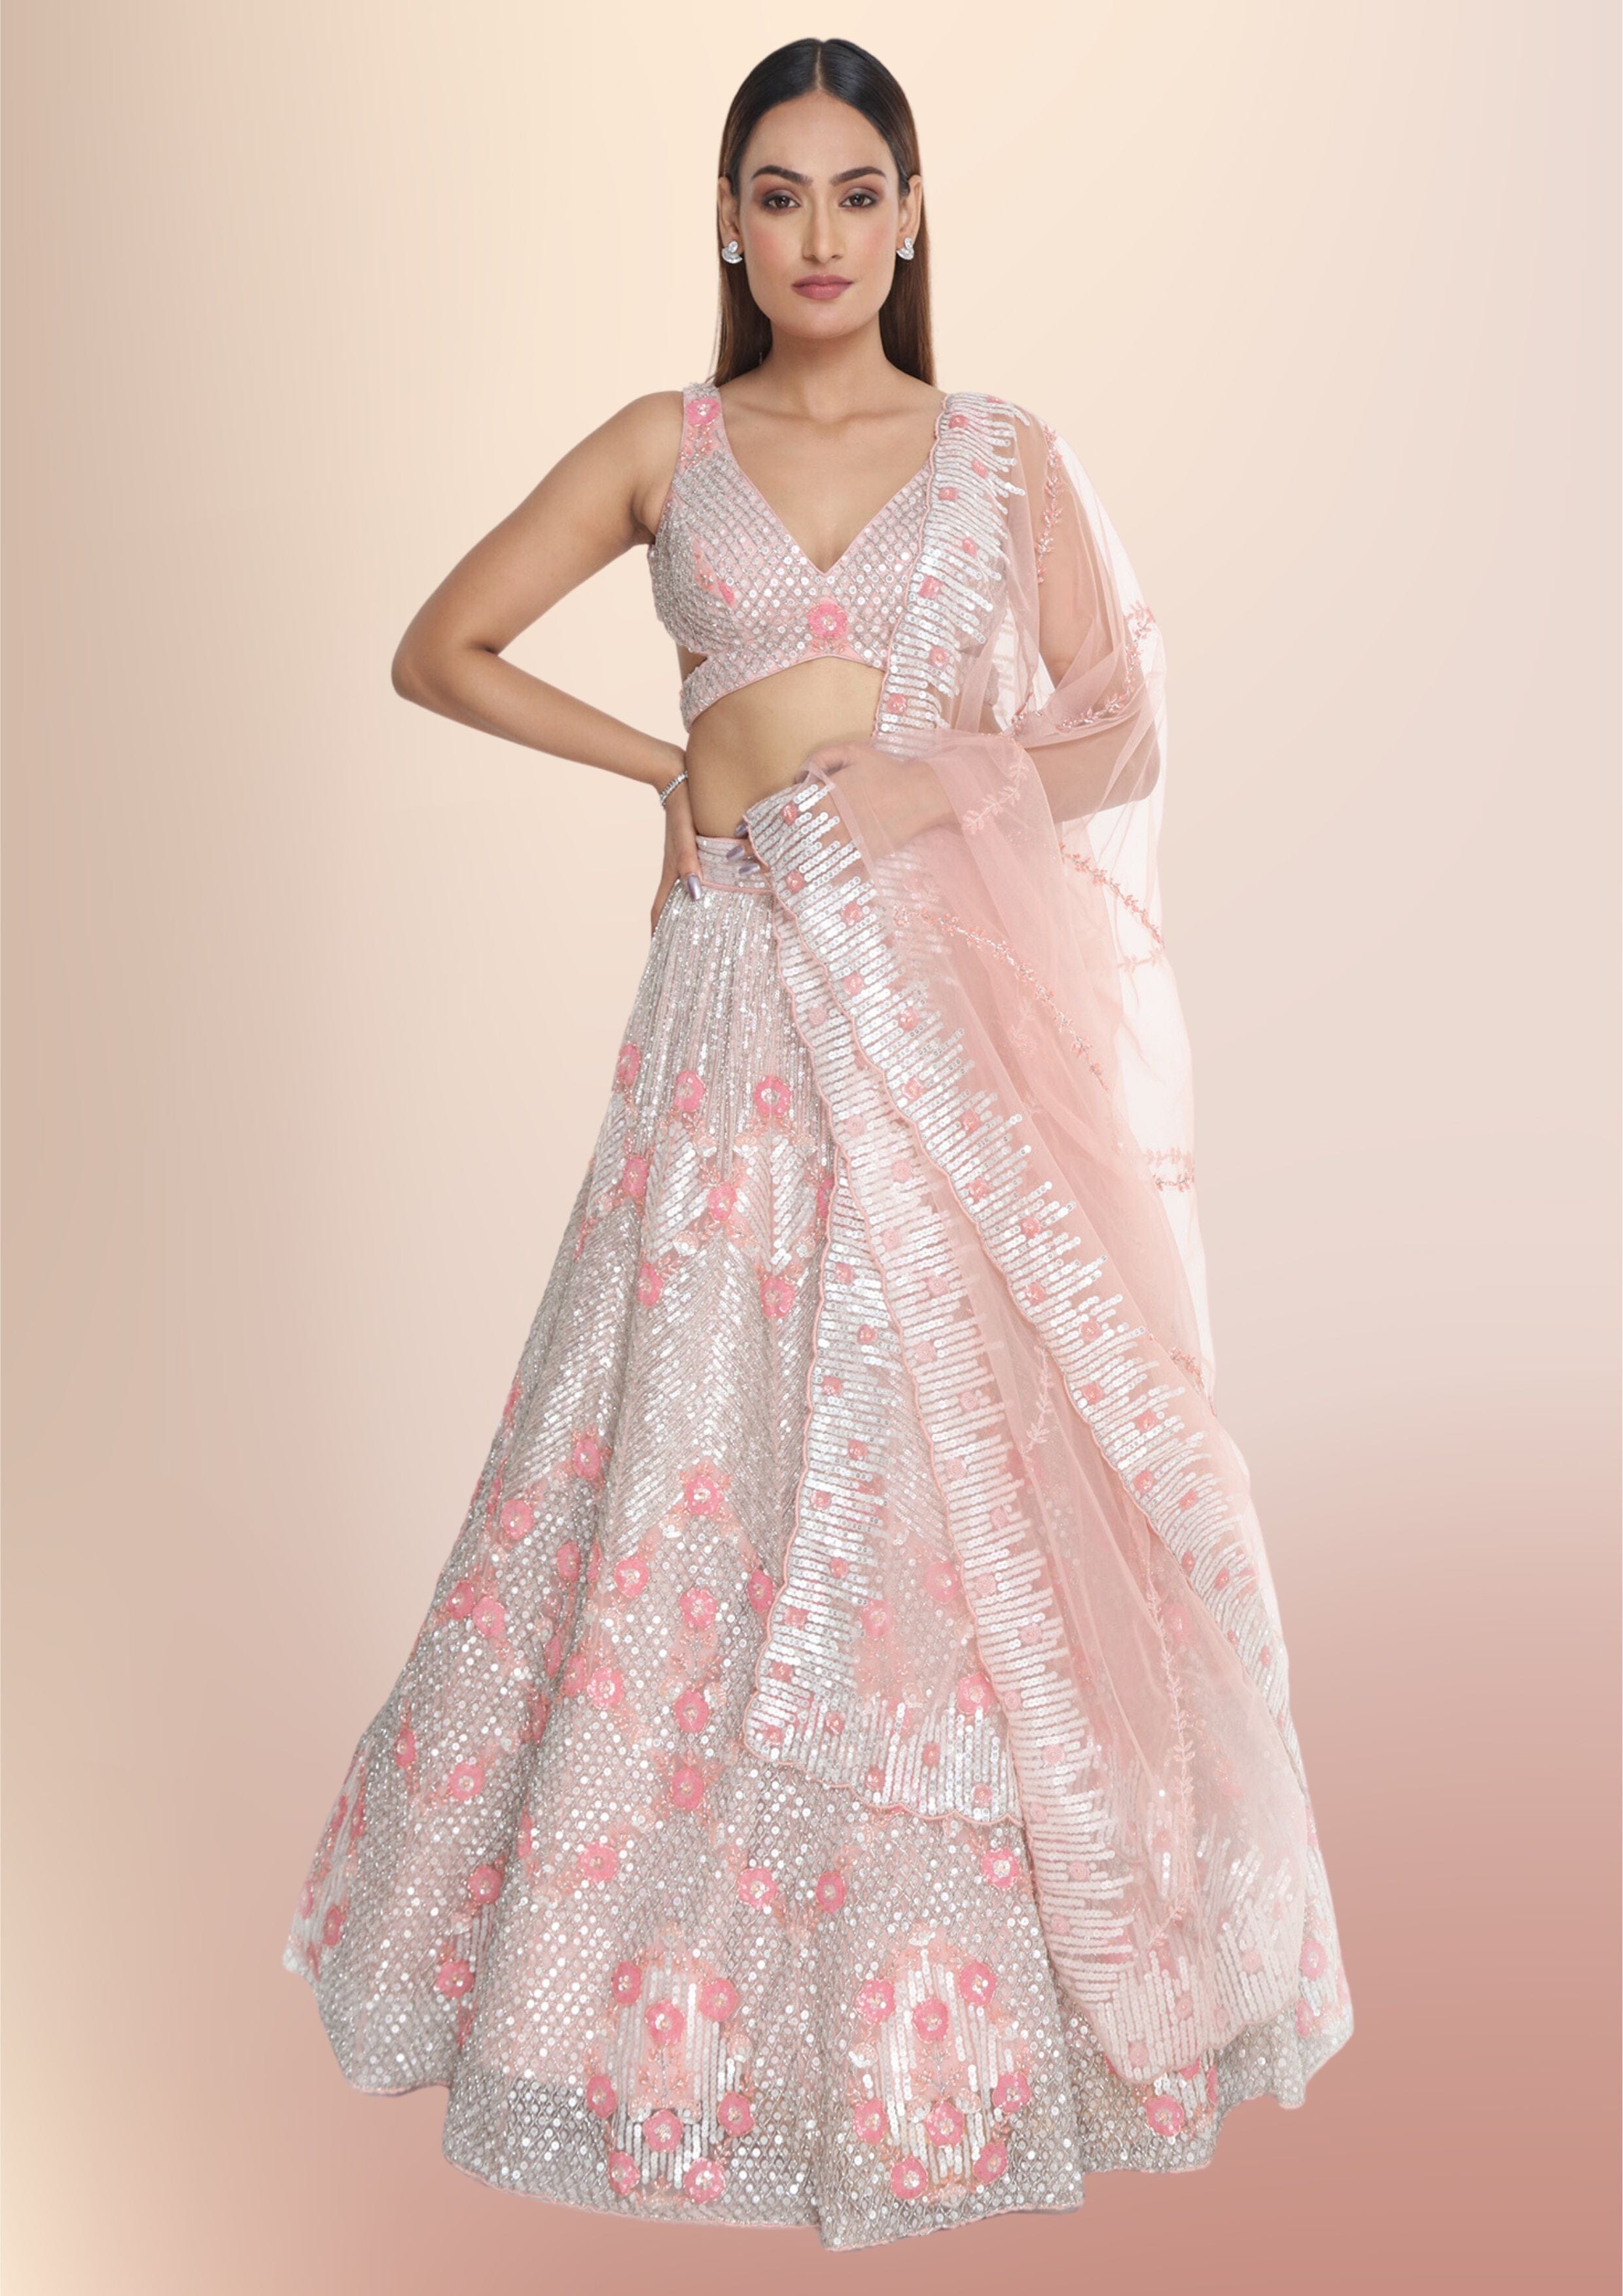 BABY PINK SHIMMERY COCKTAIL LEHENGA SET WITH A HAND EMBROIDERED MIRROR WORK  BLOUSE PAIRED WITH A MATCHING DUPATTA AND FRILL DETAILS. - Seasons India